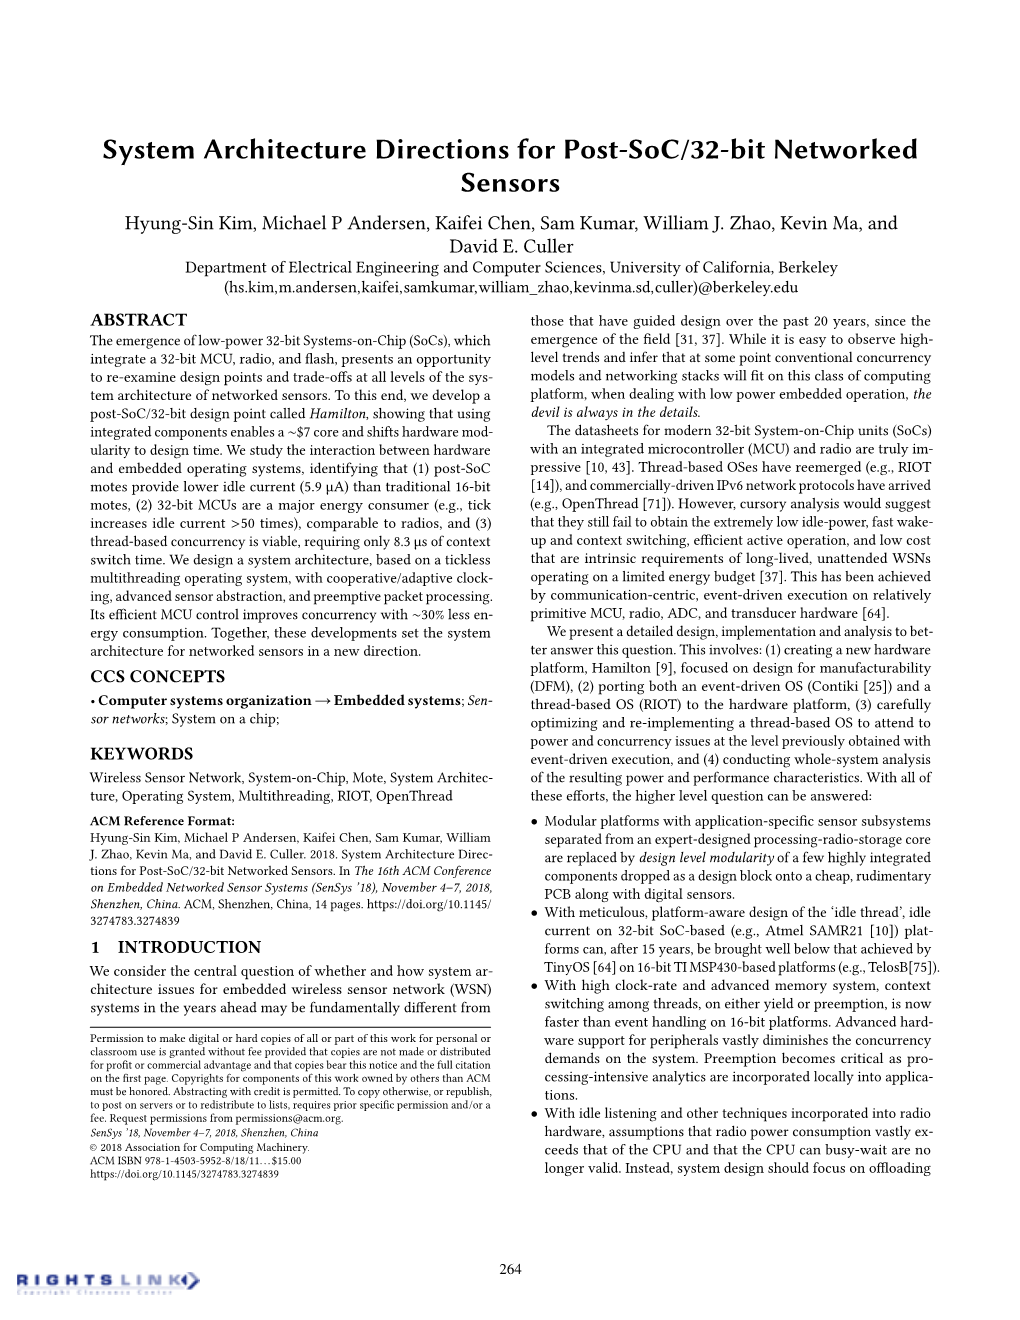 System Architecture Directions for Post-Soc/32-Bit Networked Sensors Hyung-Sin Kim, Michael P Andersen, Kaifei Chen, Sam Kumar, William J